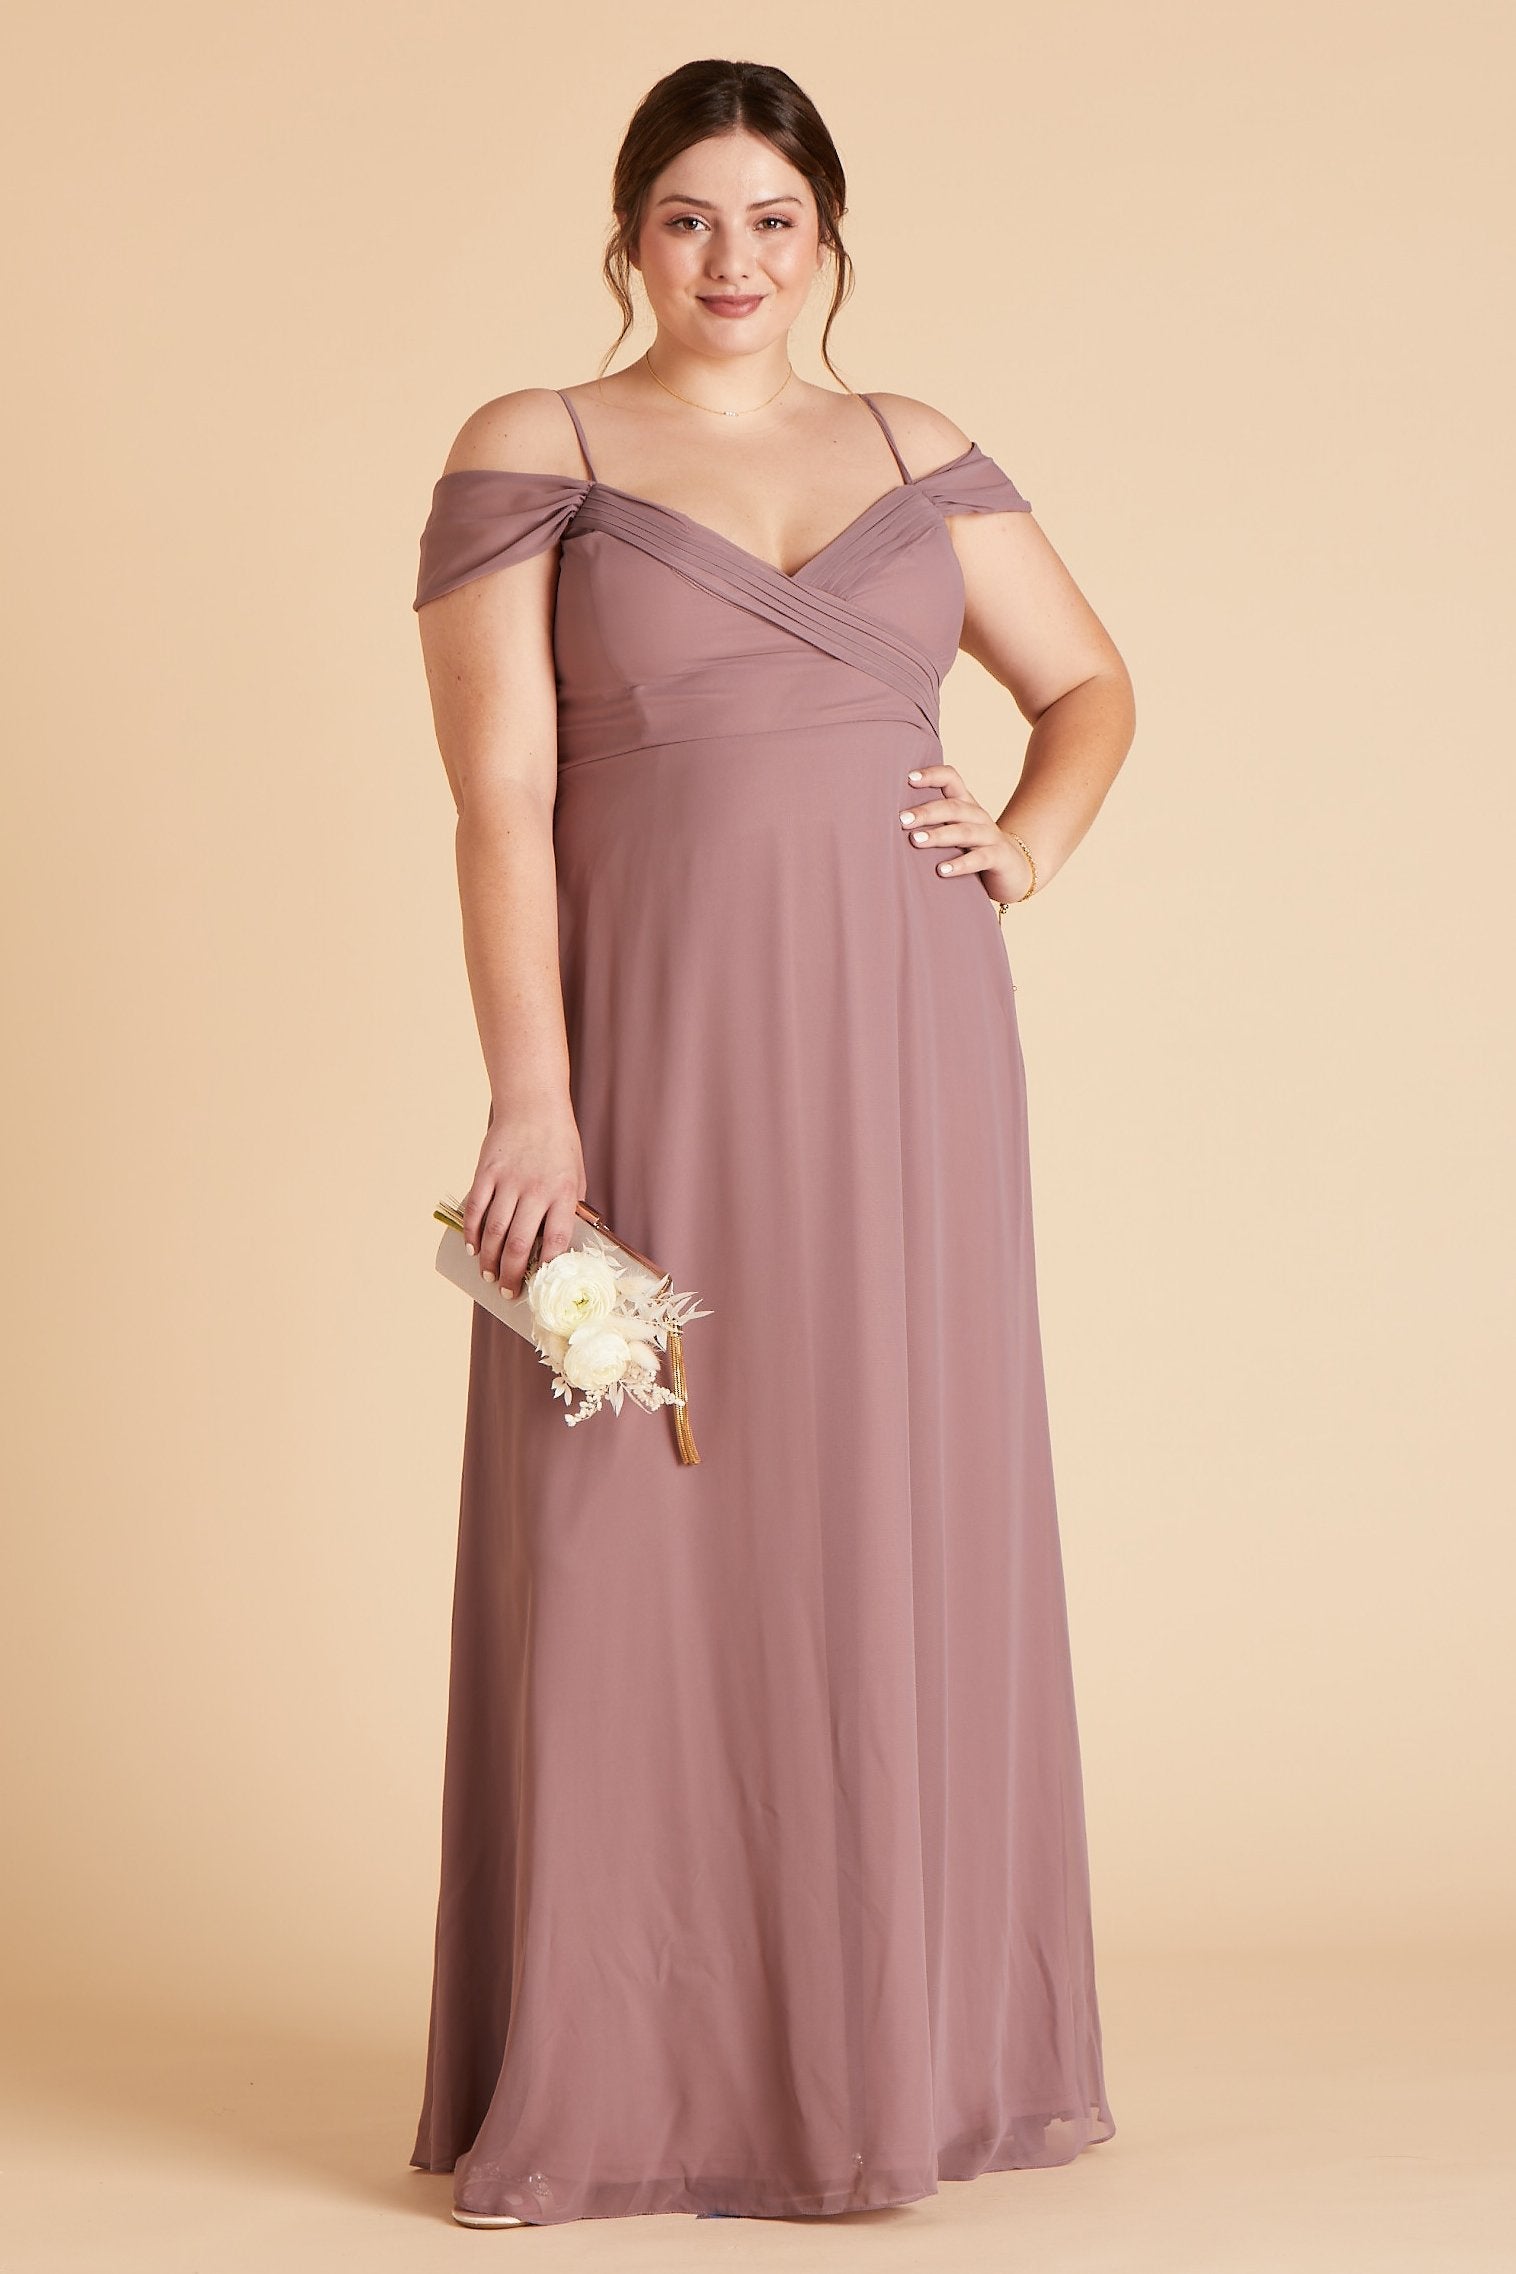 Spence convertible plus size bridesmaid dress in dark mauve chiffon by Birdy Grey, front view